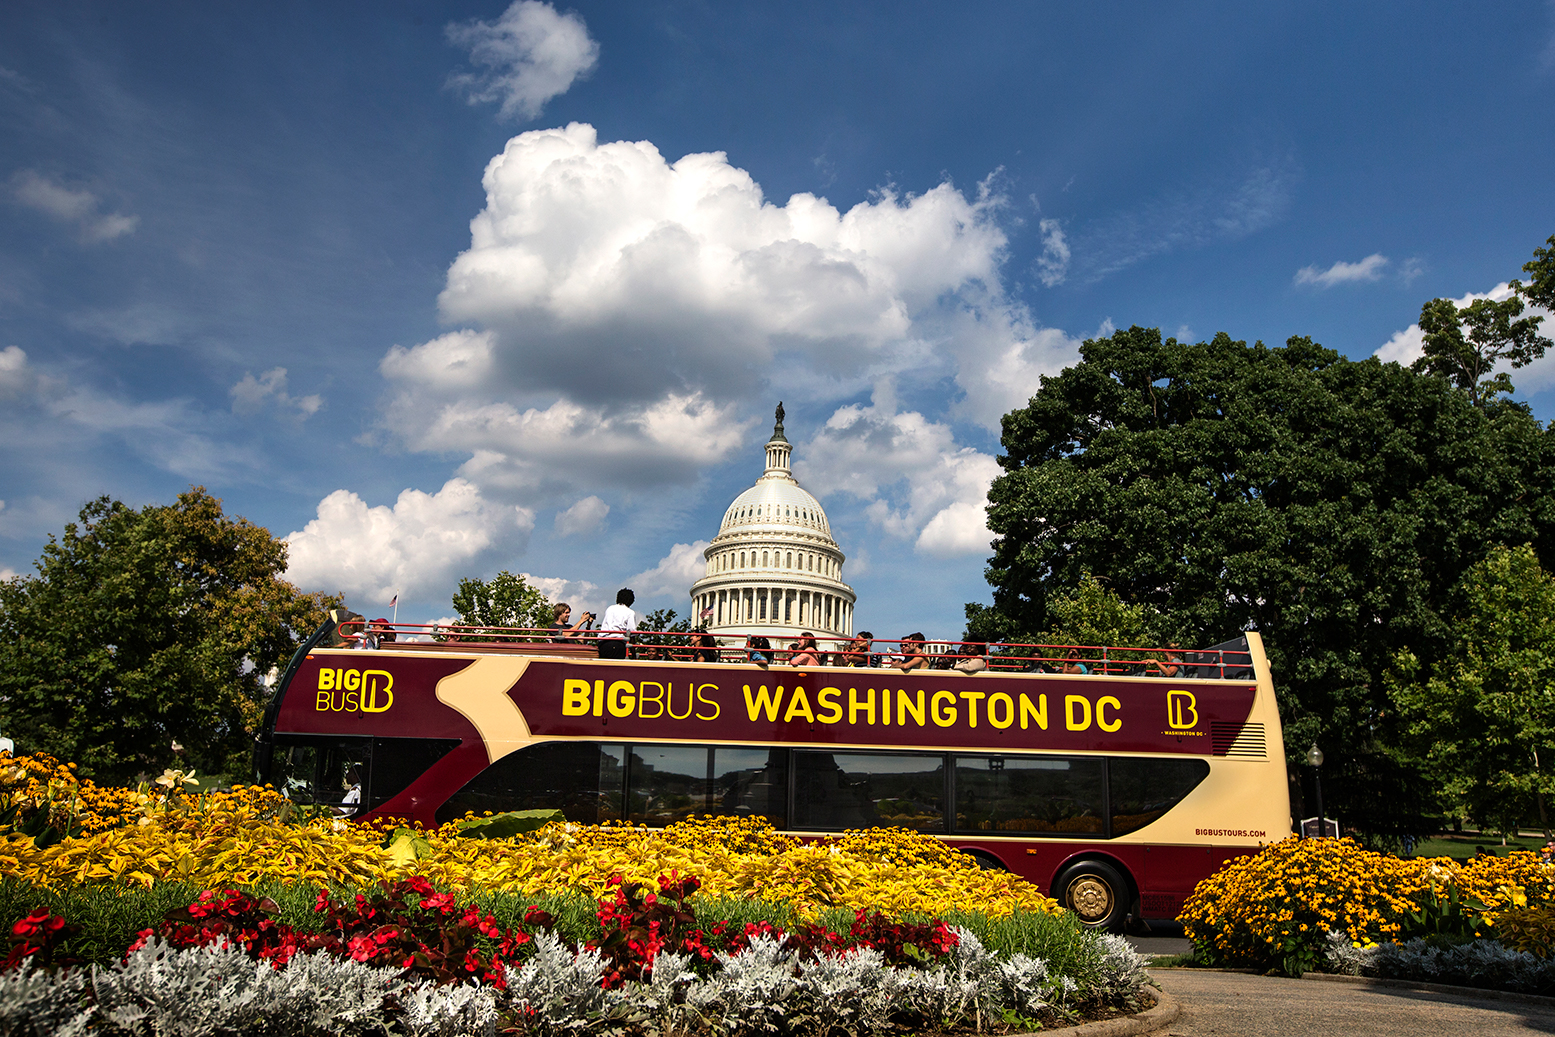 Top Landmarks To Visit on National Mall in DC